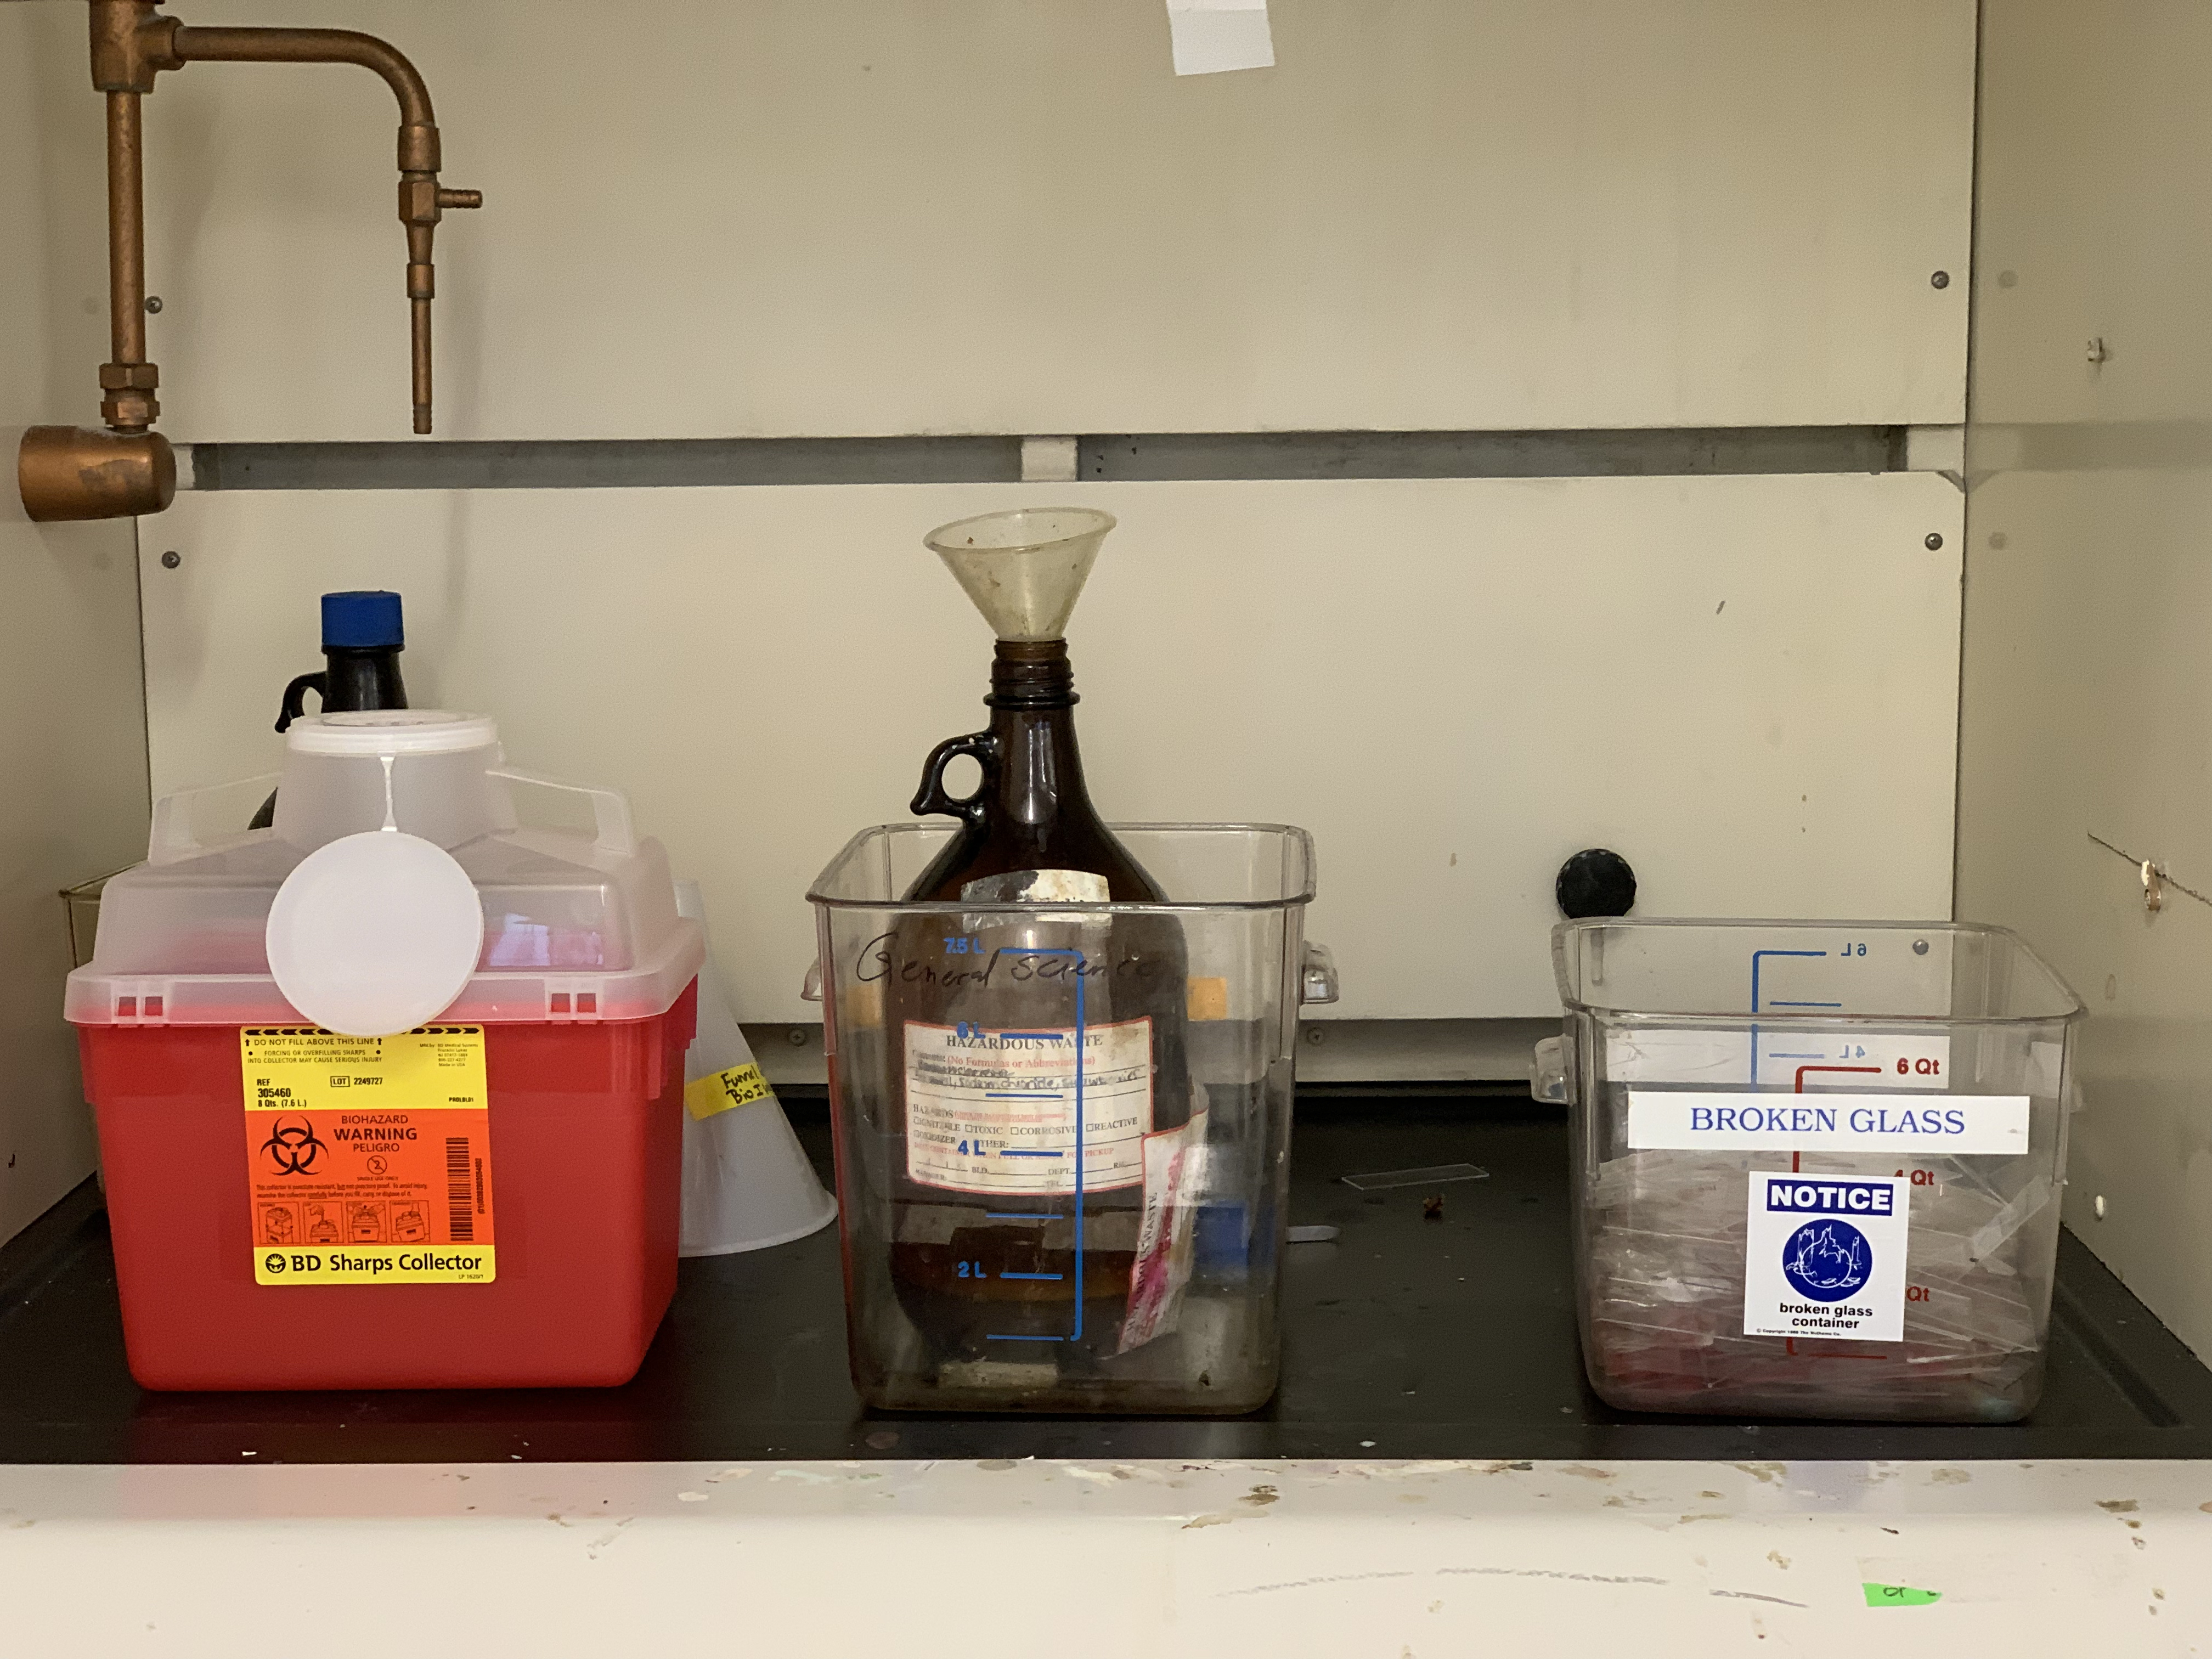 Waste containers for sharps, liquids and broken glass in the fume hood.